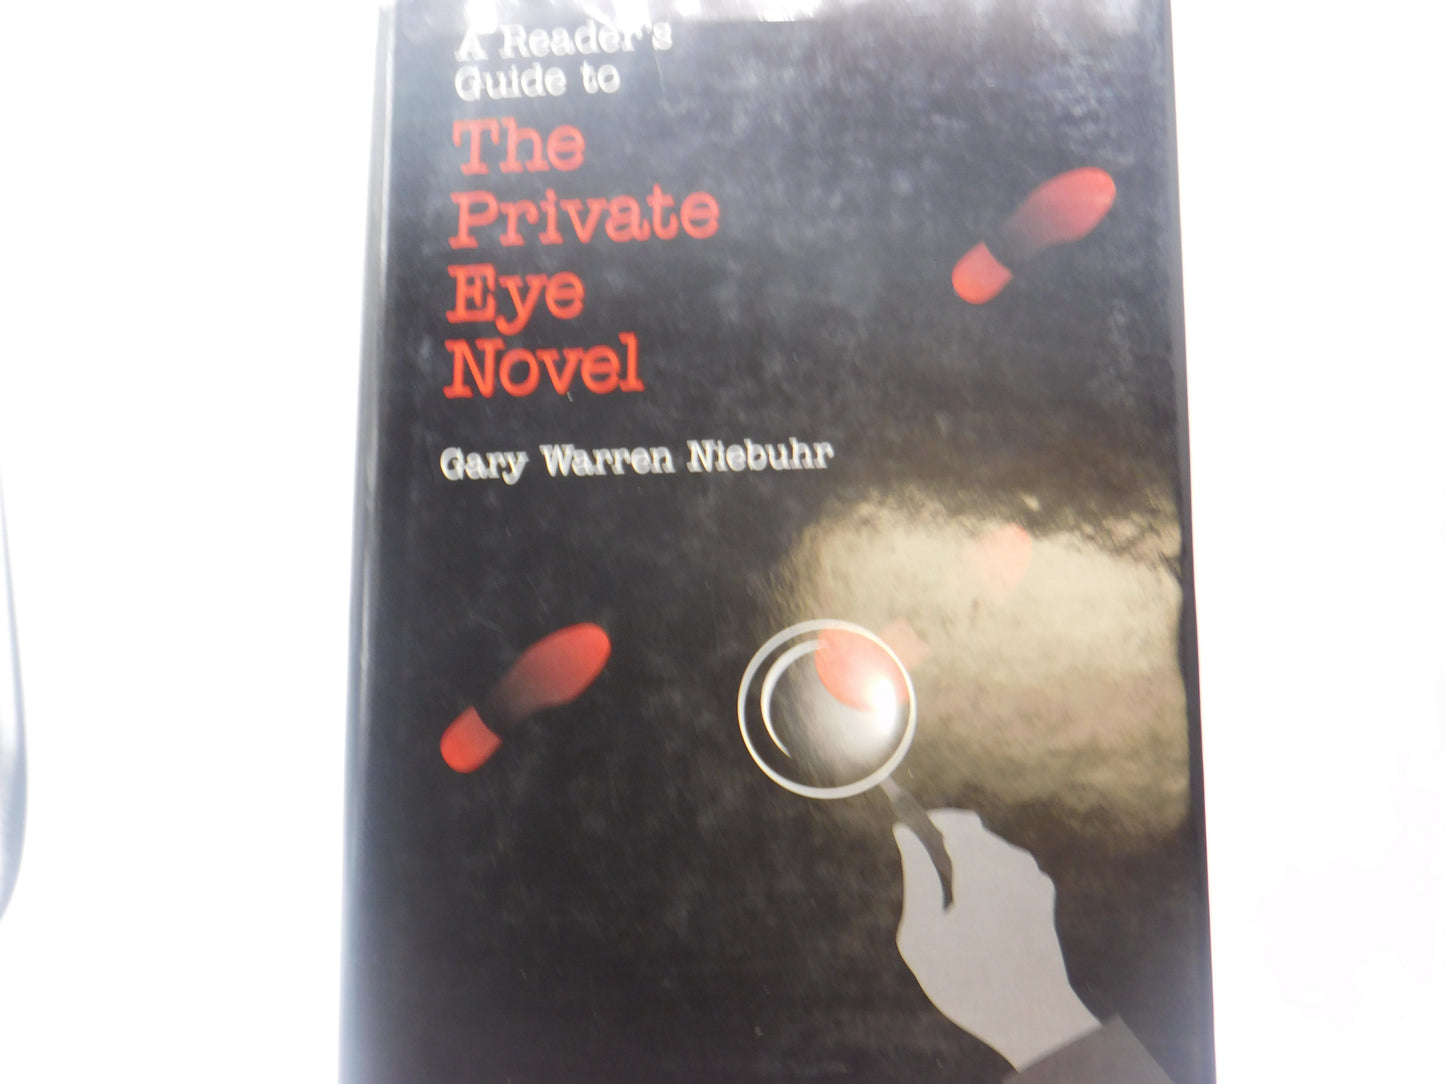 A Reader's Guide to the Private Eye Novel by Gary Warren Niebuhr